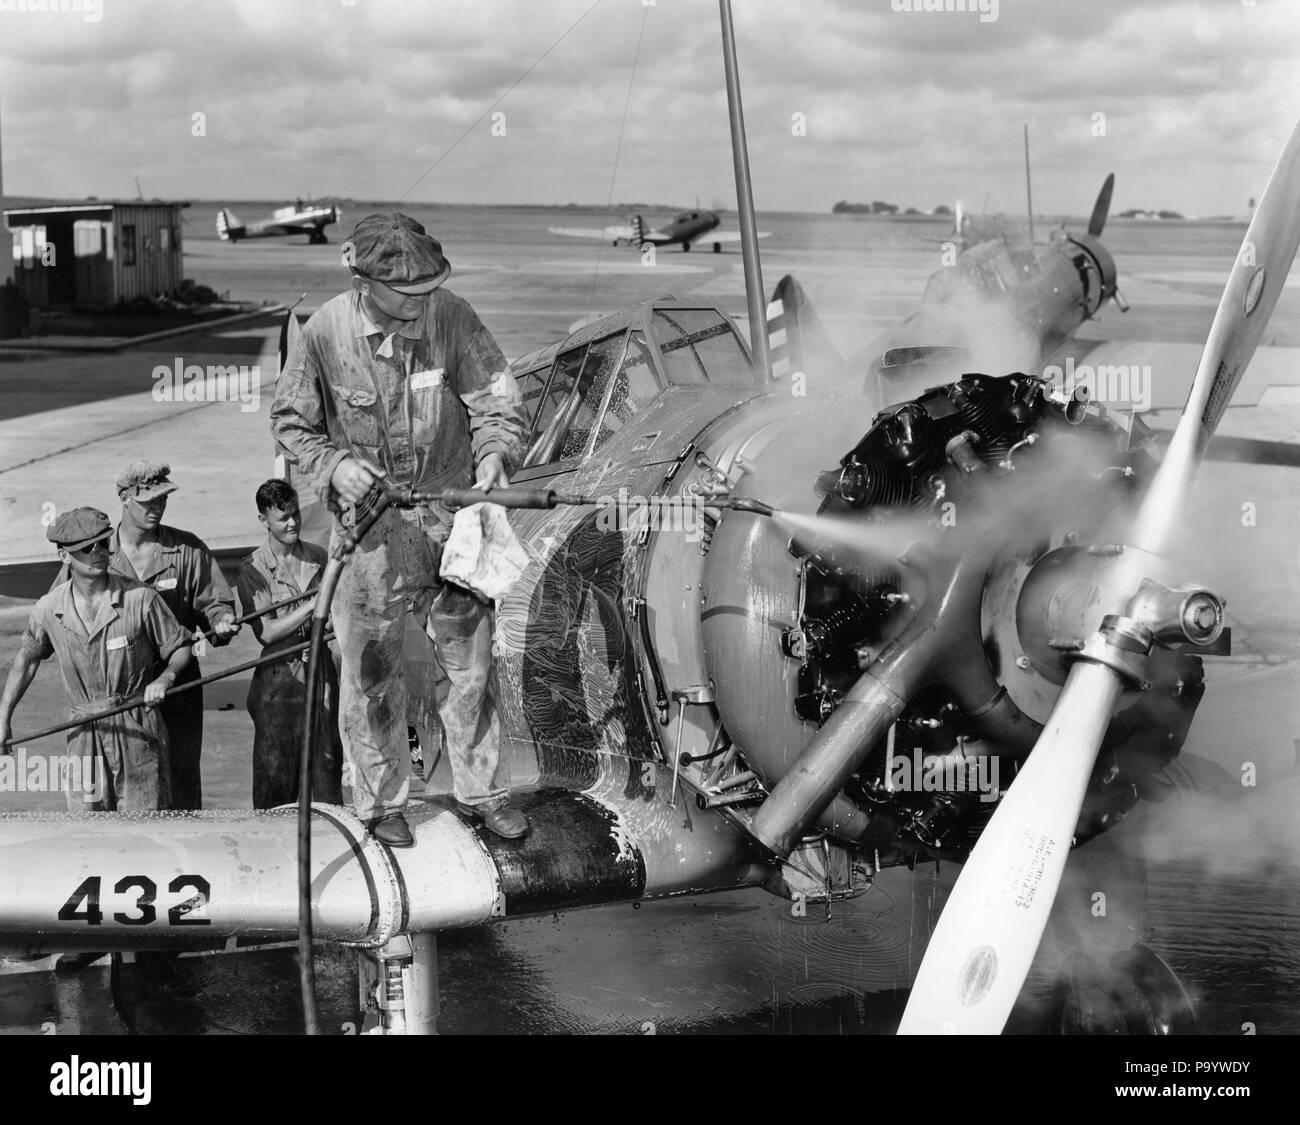 1940s WWII CREW OF MAINTENANCE MEN SERVICING CLEANING ENGINE SINGLE PROPELLER AIRPLANE WITH HIGH PRESSURE SPRAY - q74713 CPC001 HARS PRESSURE TRANSPORT COPY SPACE FULL-LENGTH PERSONS GROWN-UP II MALES TRANSPORTATION B&W PROPELLER CHORE VICTORY SCULLING WORLD WAR WORLD WAR II OCCUPATIONS MAINTENANCE MOBILITY CONFLICTING SERVICING SPRAY TASK YOUNG ADULT MAN BATTLING BLACK AND WHITE CAUCASIAN ETHNICITY OLD FASHIONED Stock Photo